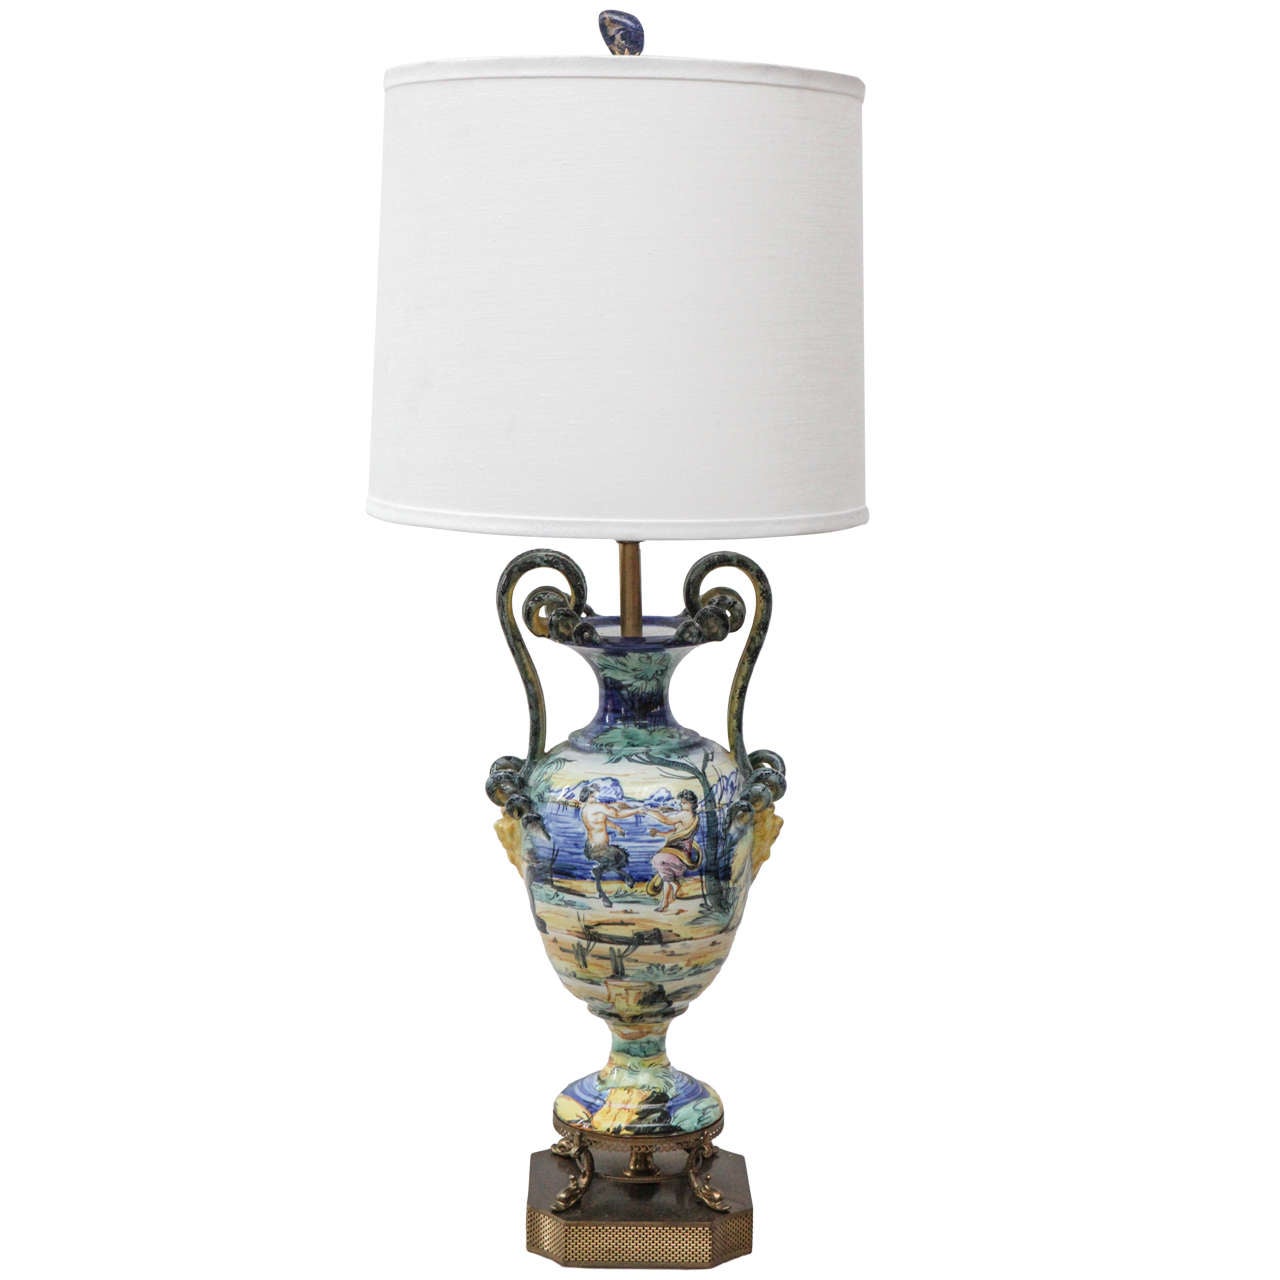 Ornate Urn Lamp with Handles and Hand Painted Details